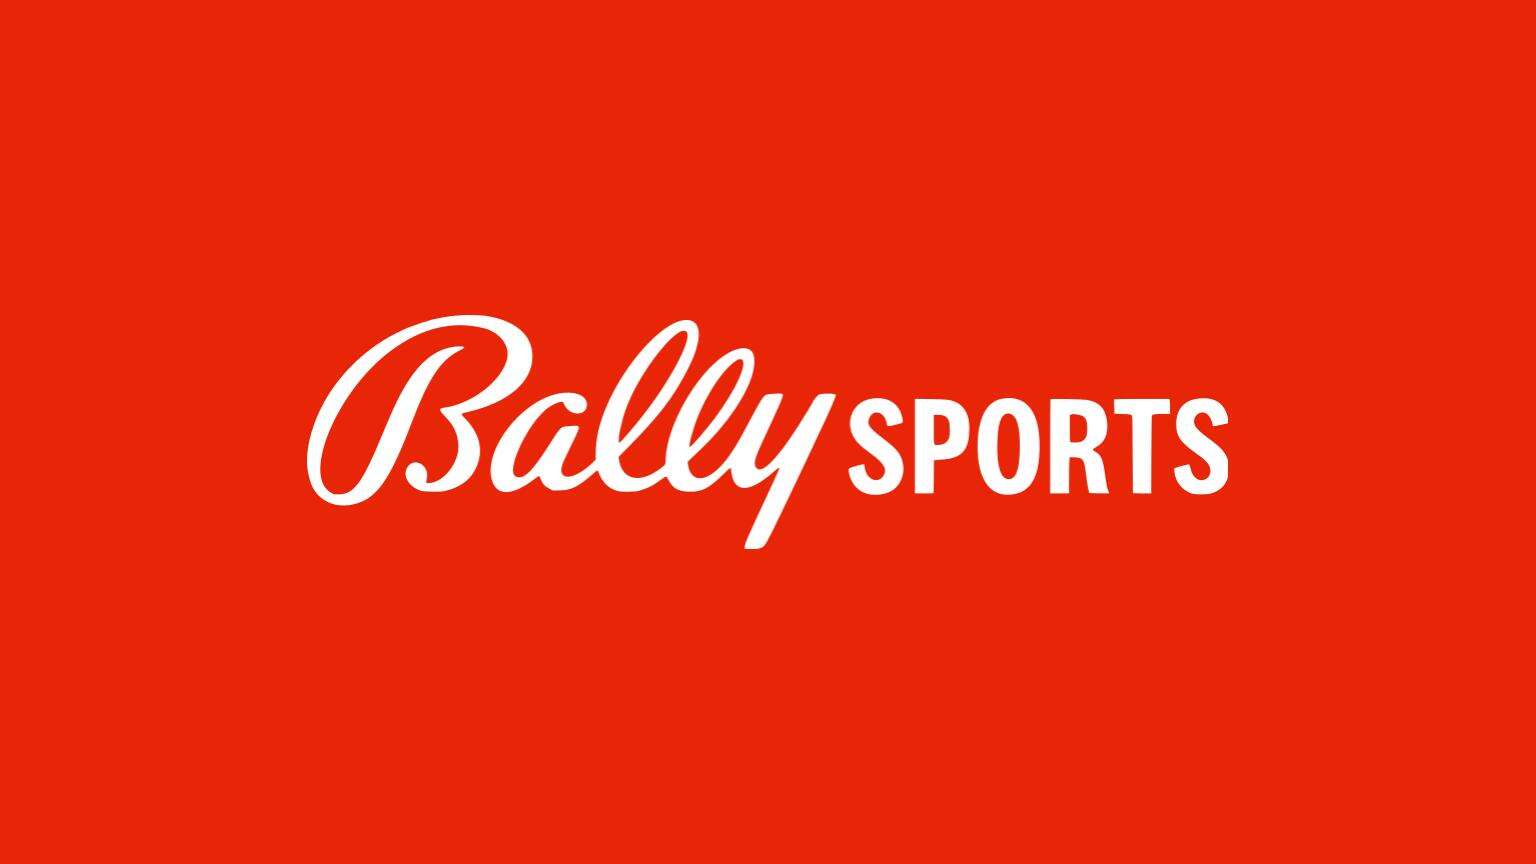 Activate Bally Sports on Roku, FireStick, Apple TV, Android TV, XBOX